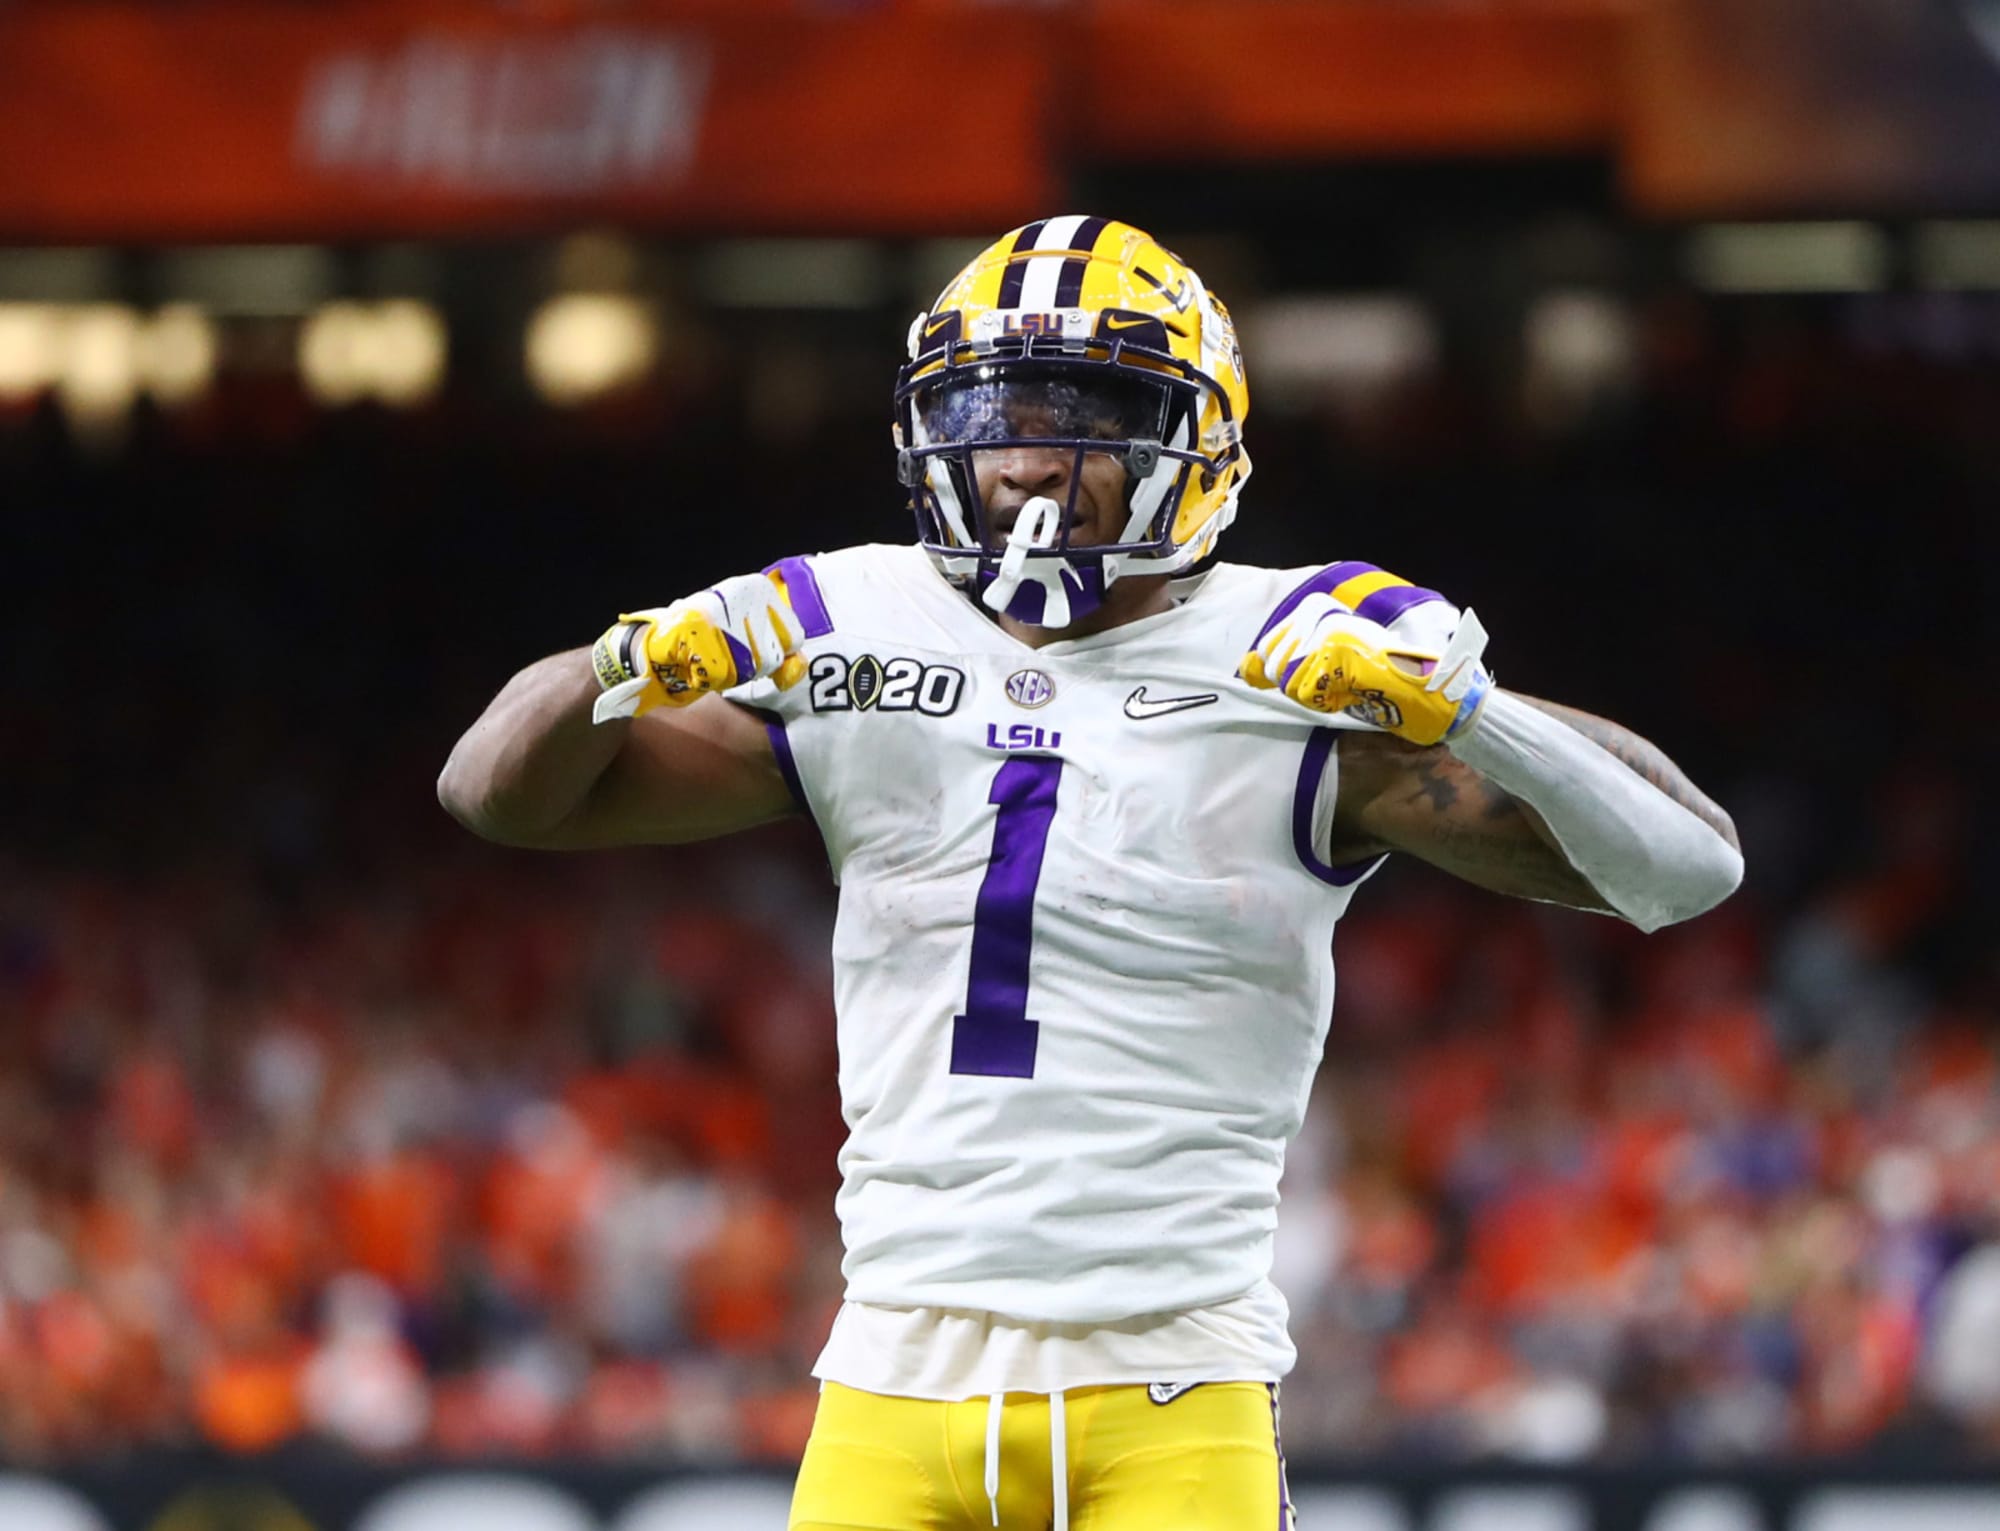 LSU football Potential landing spots for Ja'Marr Chase in 2021 NFL